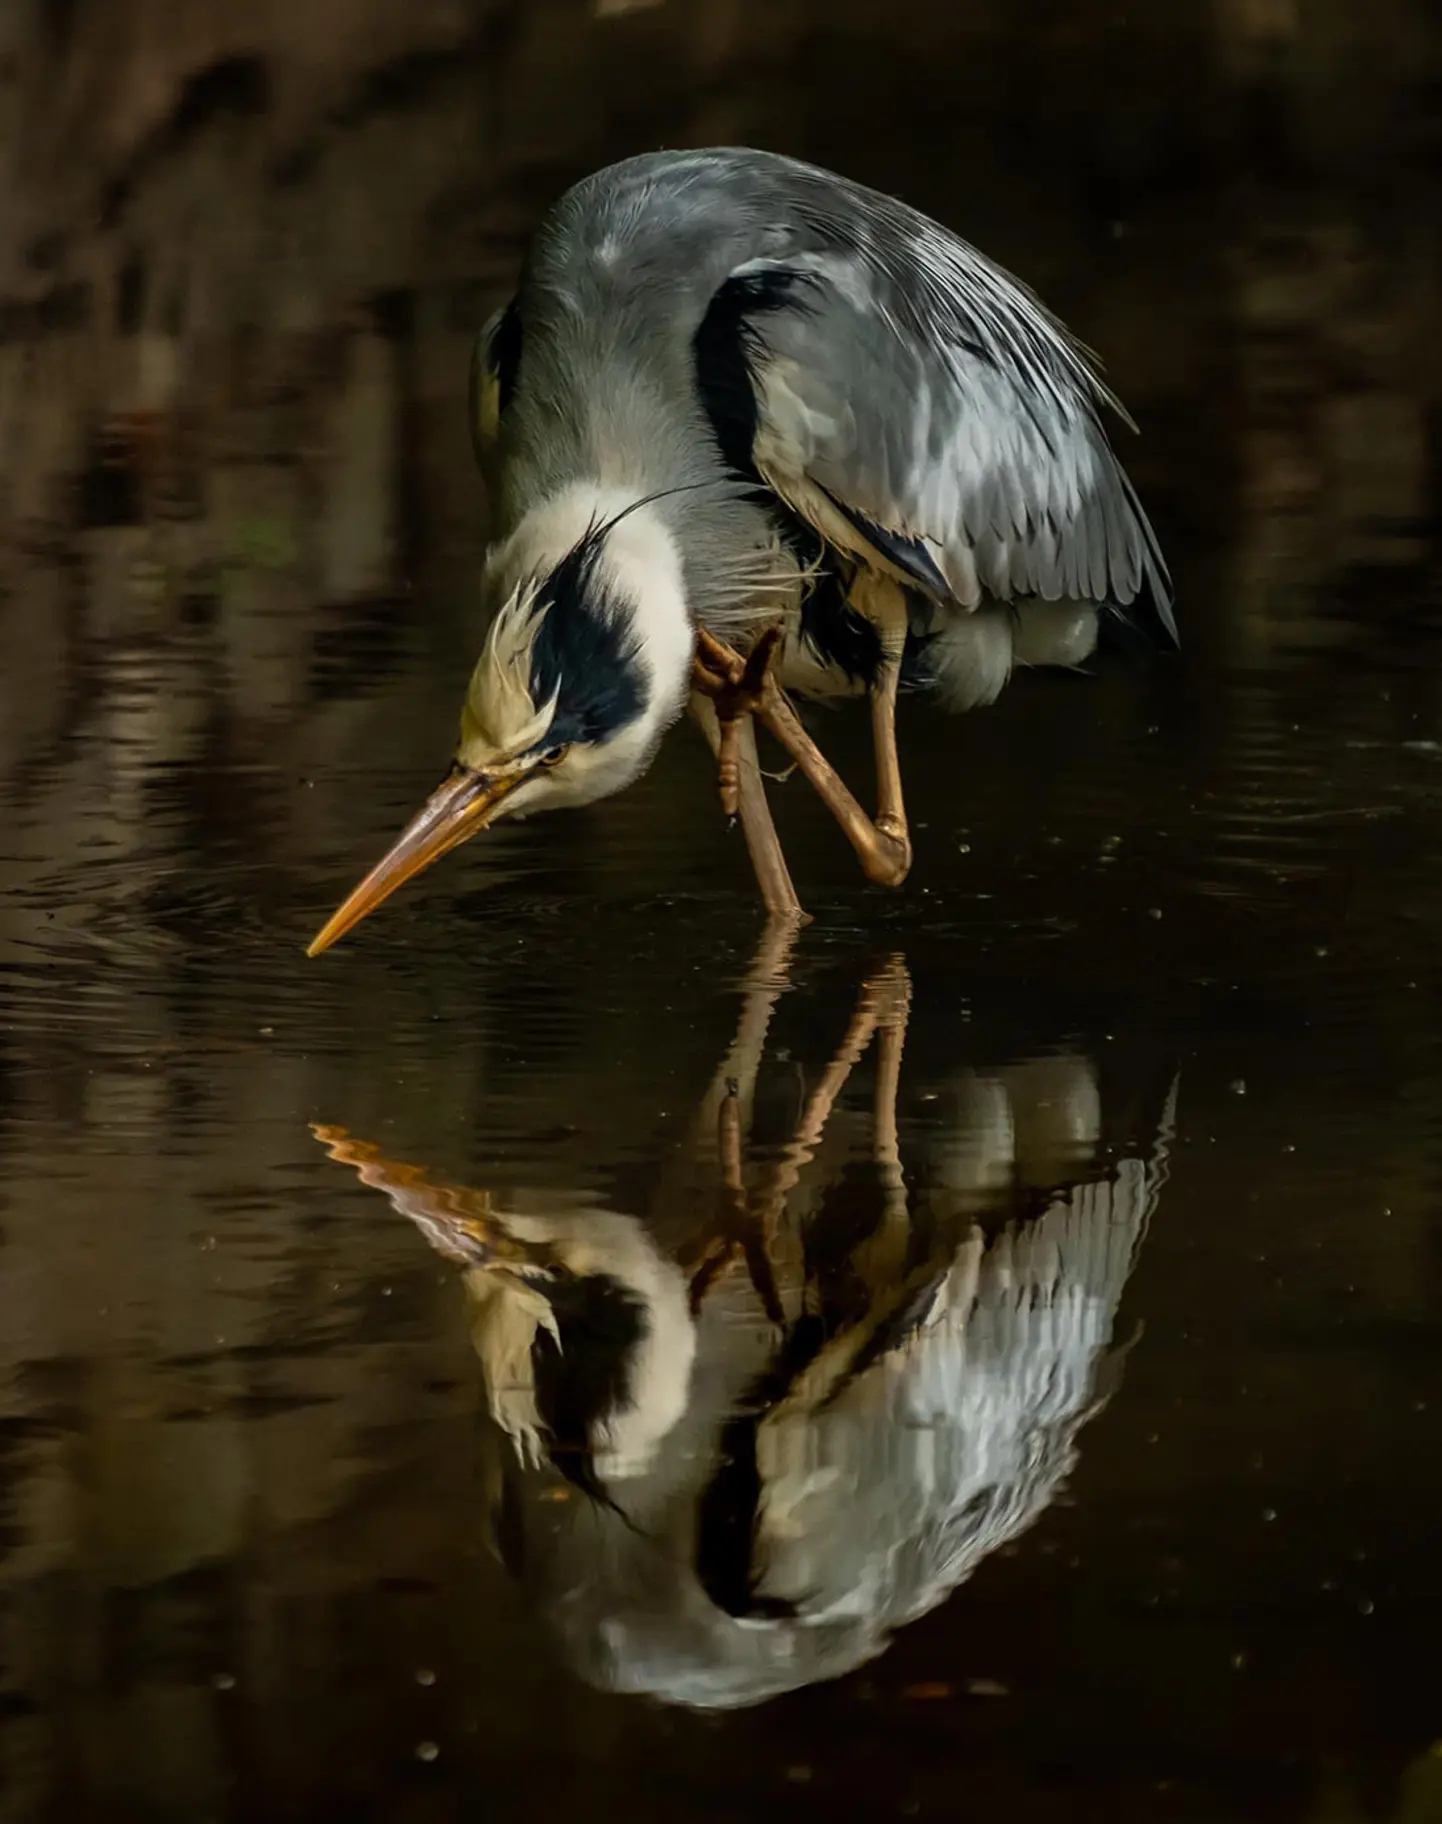 Almost a perfectly symmetrical photo of a heron standing on one leg in a large body of rippled water, the reflection a true mirror image of the large bird. A dark background reflects into the water too. One long leg disappears into the water, the other lanky limb is half bent out of the water, orange legs with long, long toes. An equally long, curved beak dips towards the water’s surface. A large stooped back with ruffled grey, black and white feathers, a long crest of black feathers on its head. 